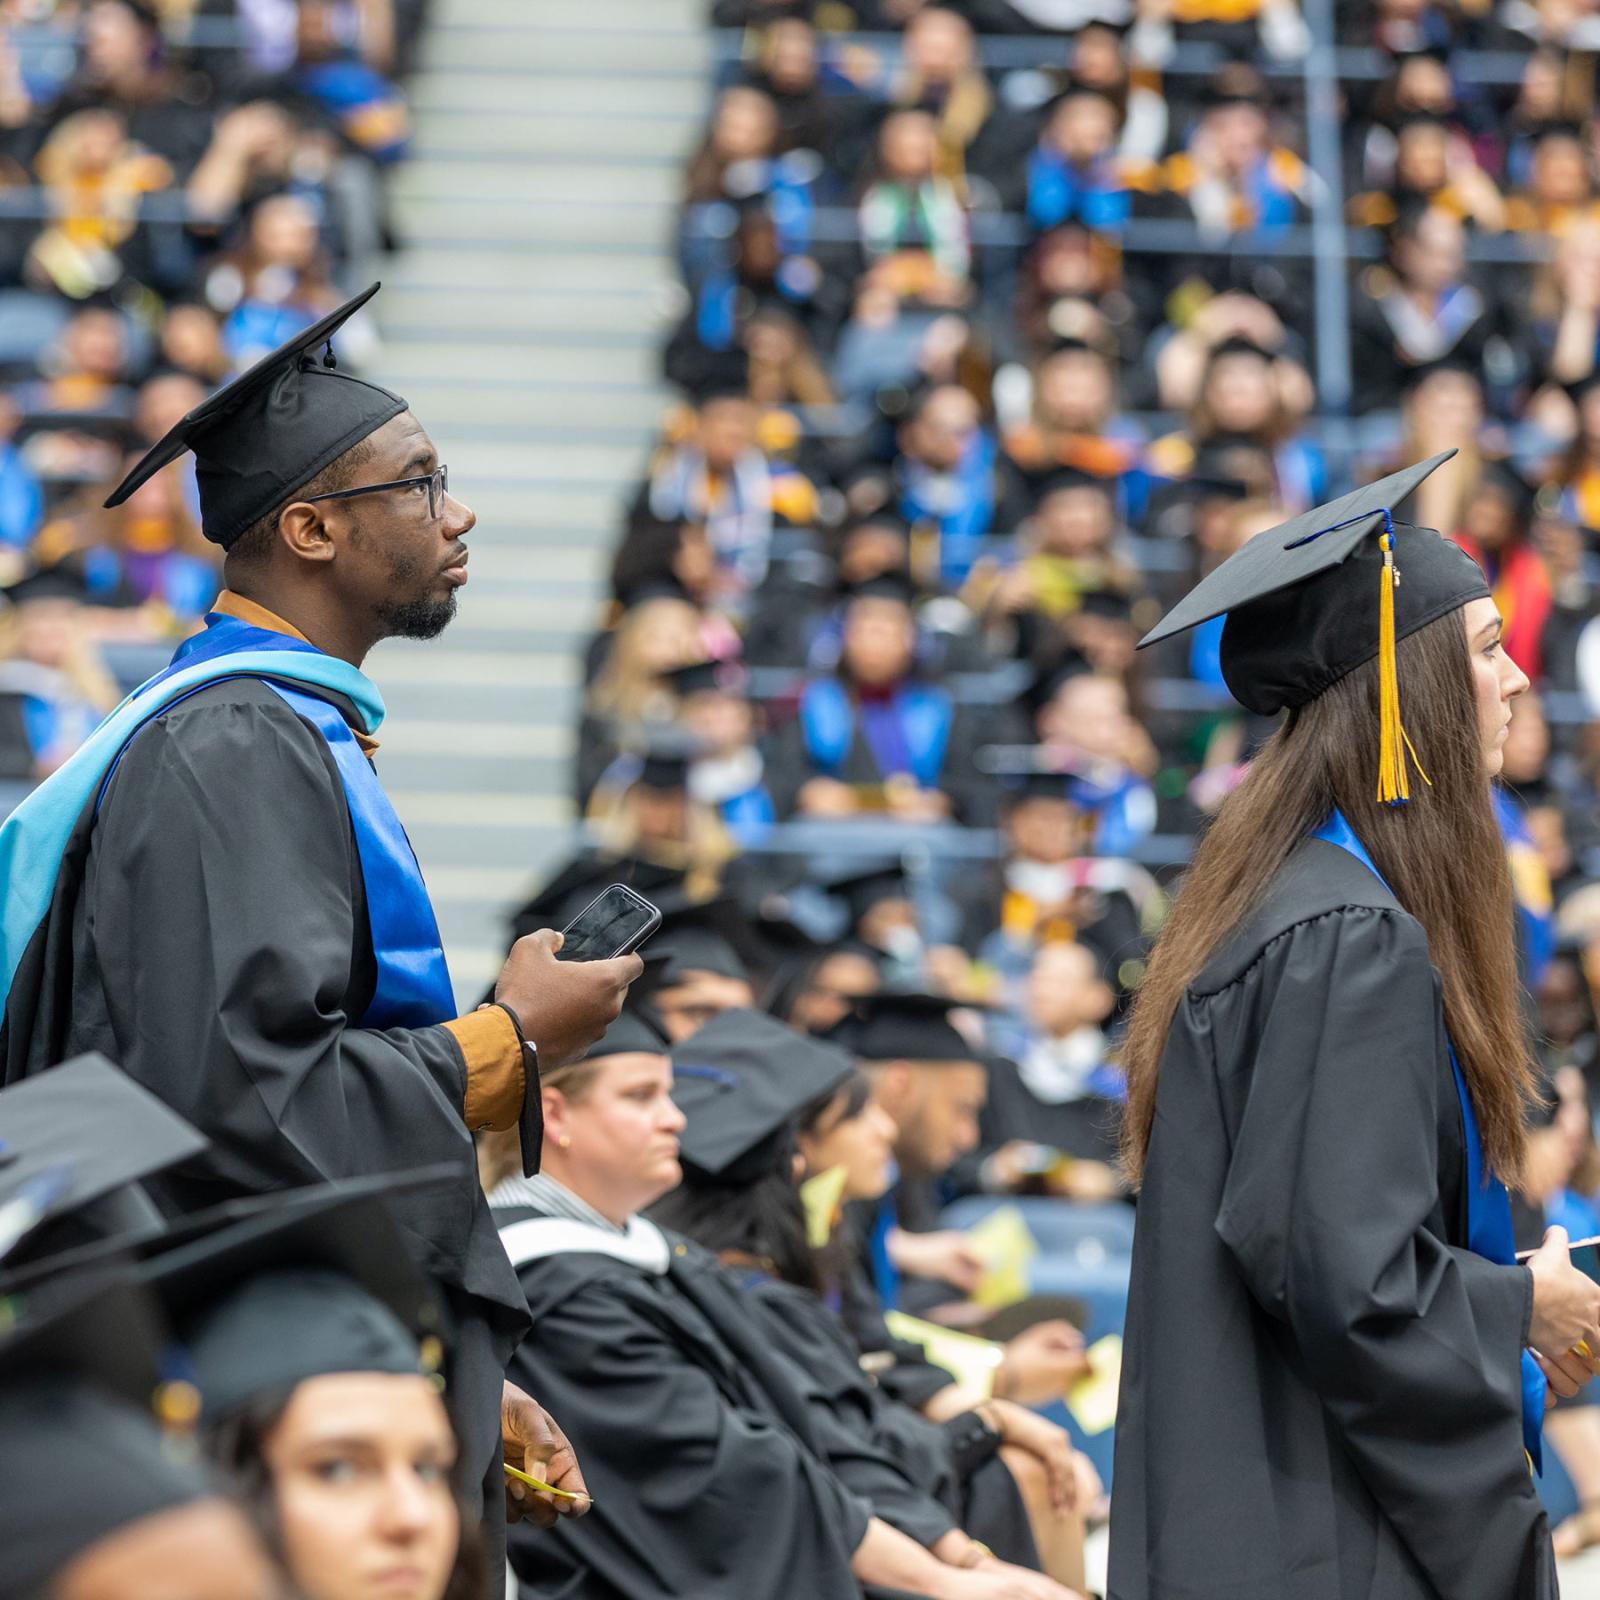 Pace University students standing in a crowd at their commencement ceremony